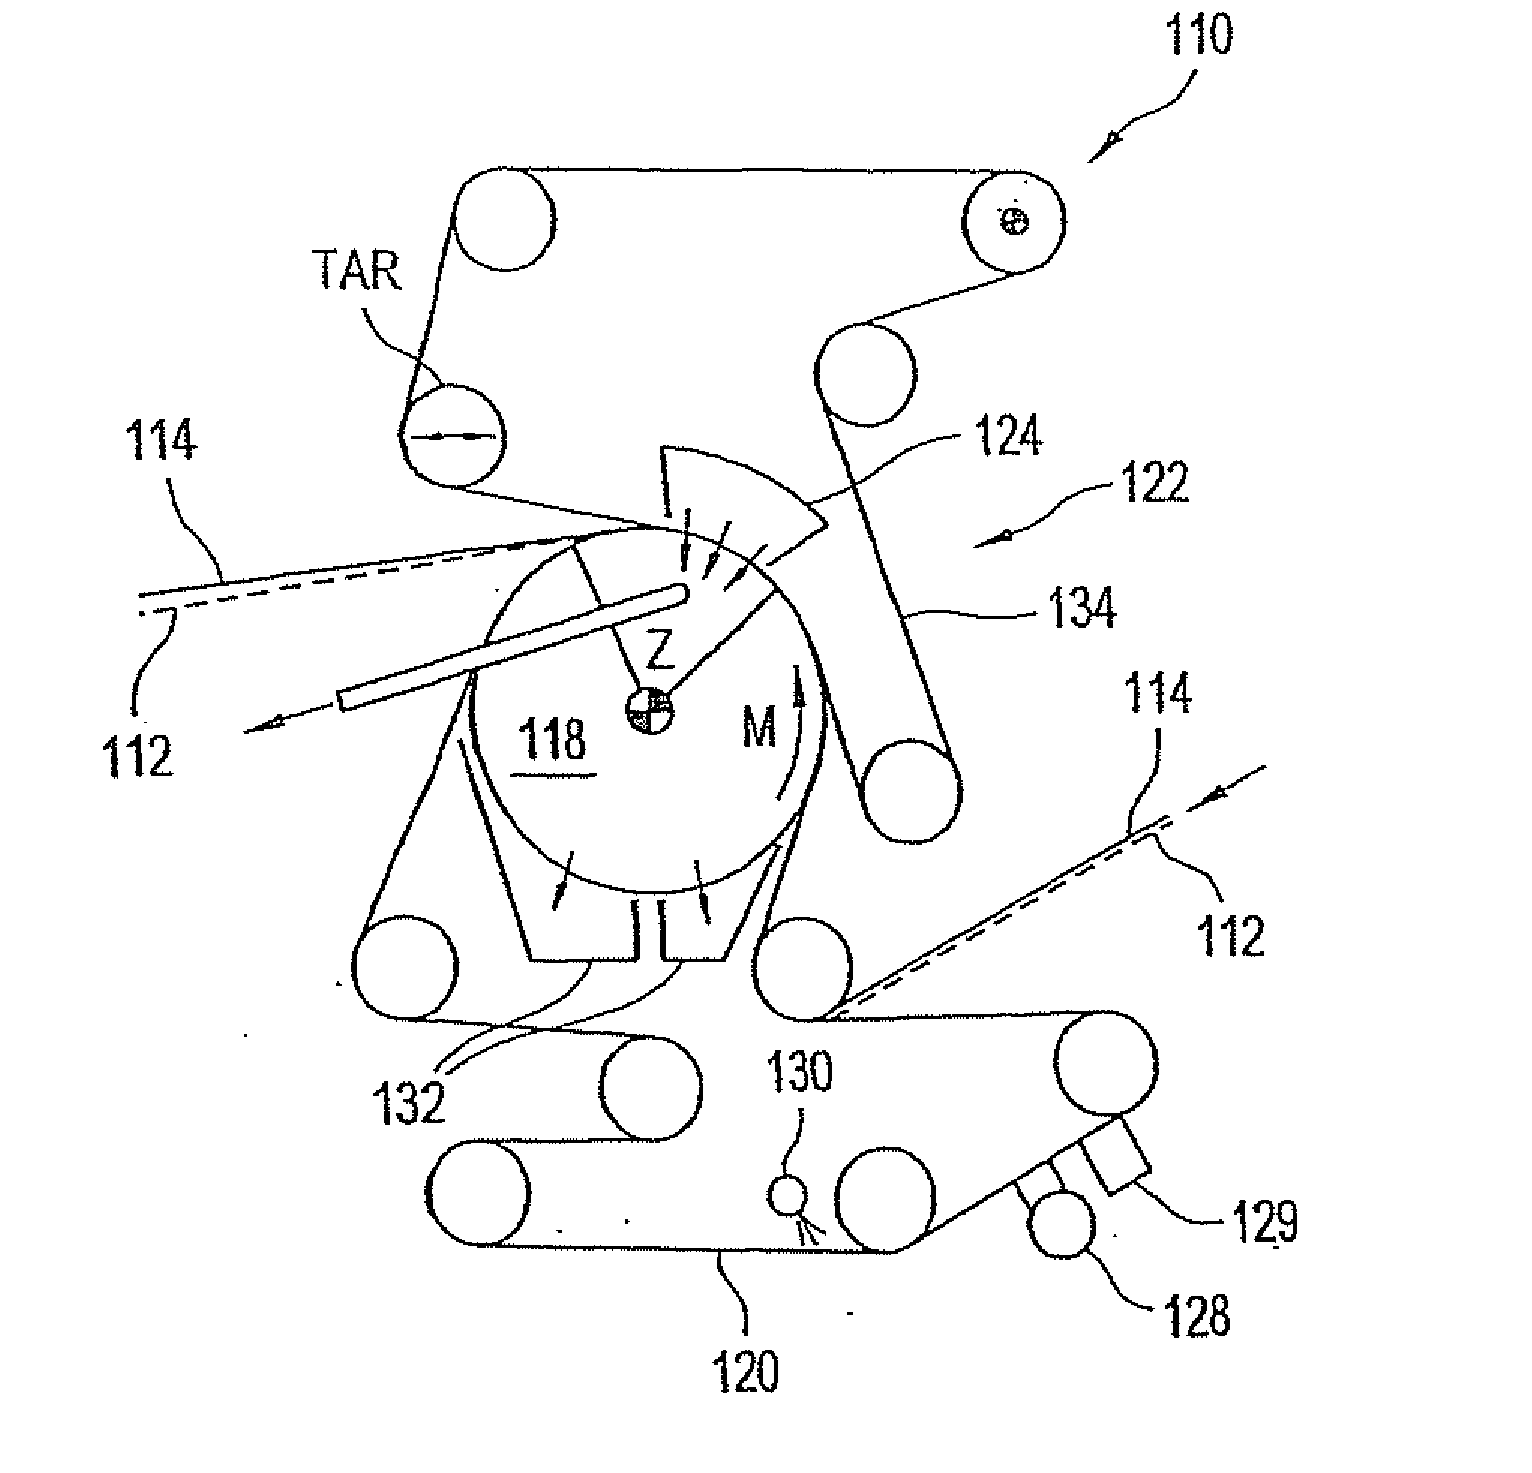 Forming fabric and/or tissue molding belt and/or molding belt for use on an atmos system